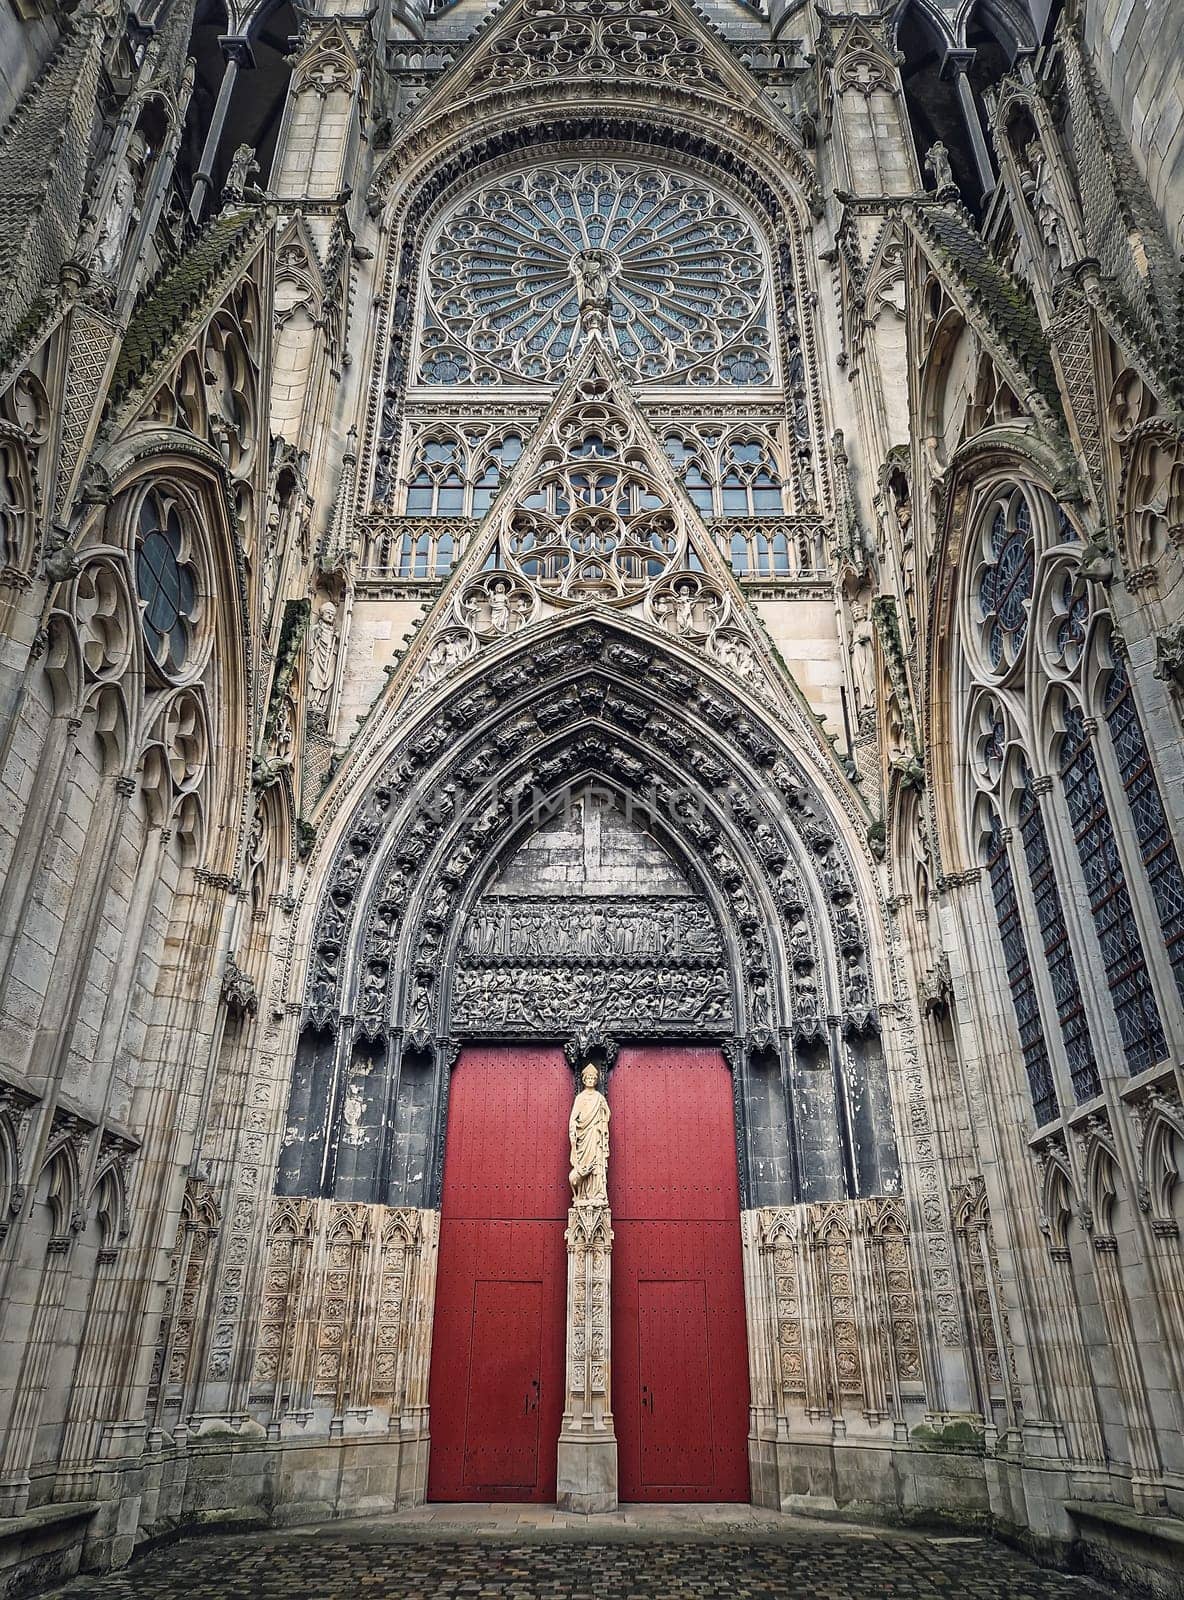 Notre Dame de Rouen Cathedral side entrance door. Architectural landmark facade details featuring styles from Early Gothic to late Flamboyant and Renaissance architecture, Normandy, France by psychoshadow